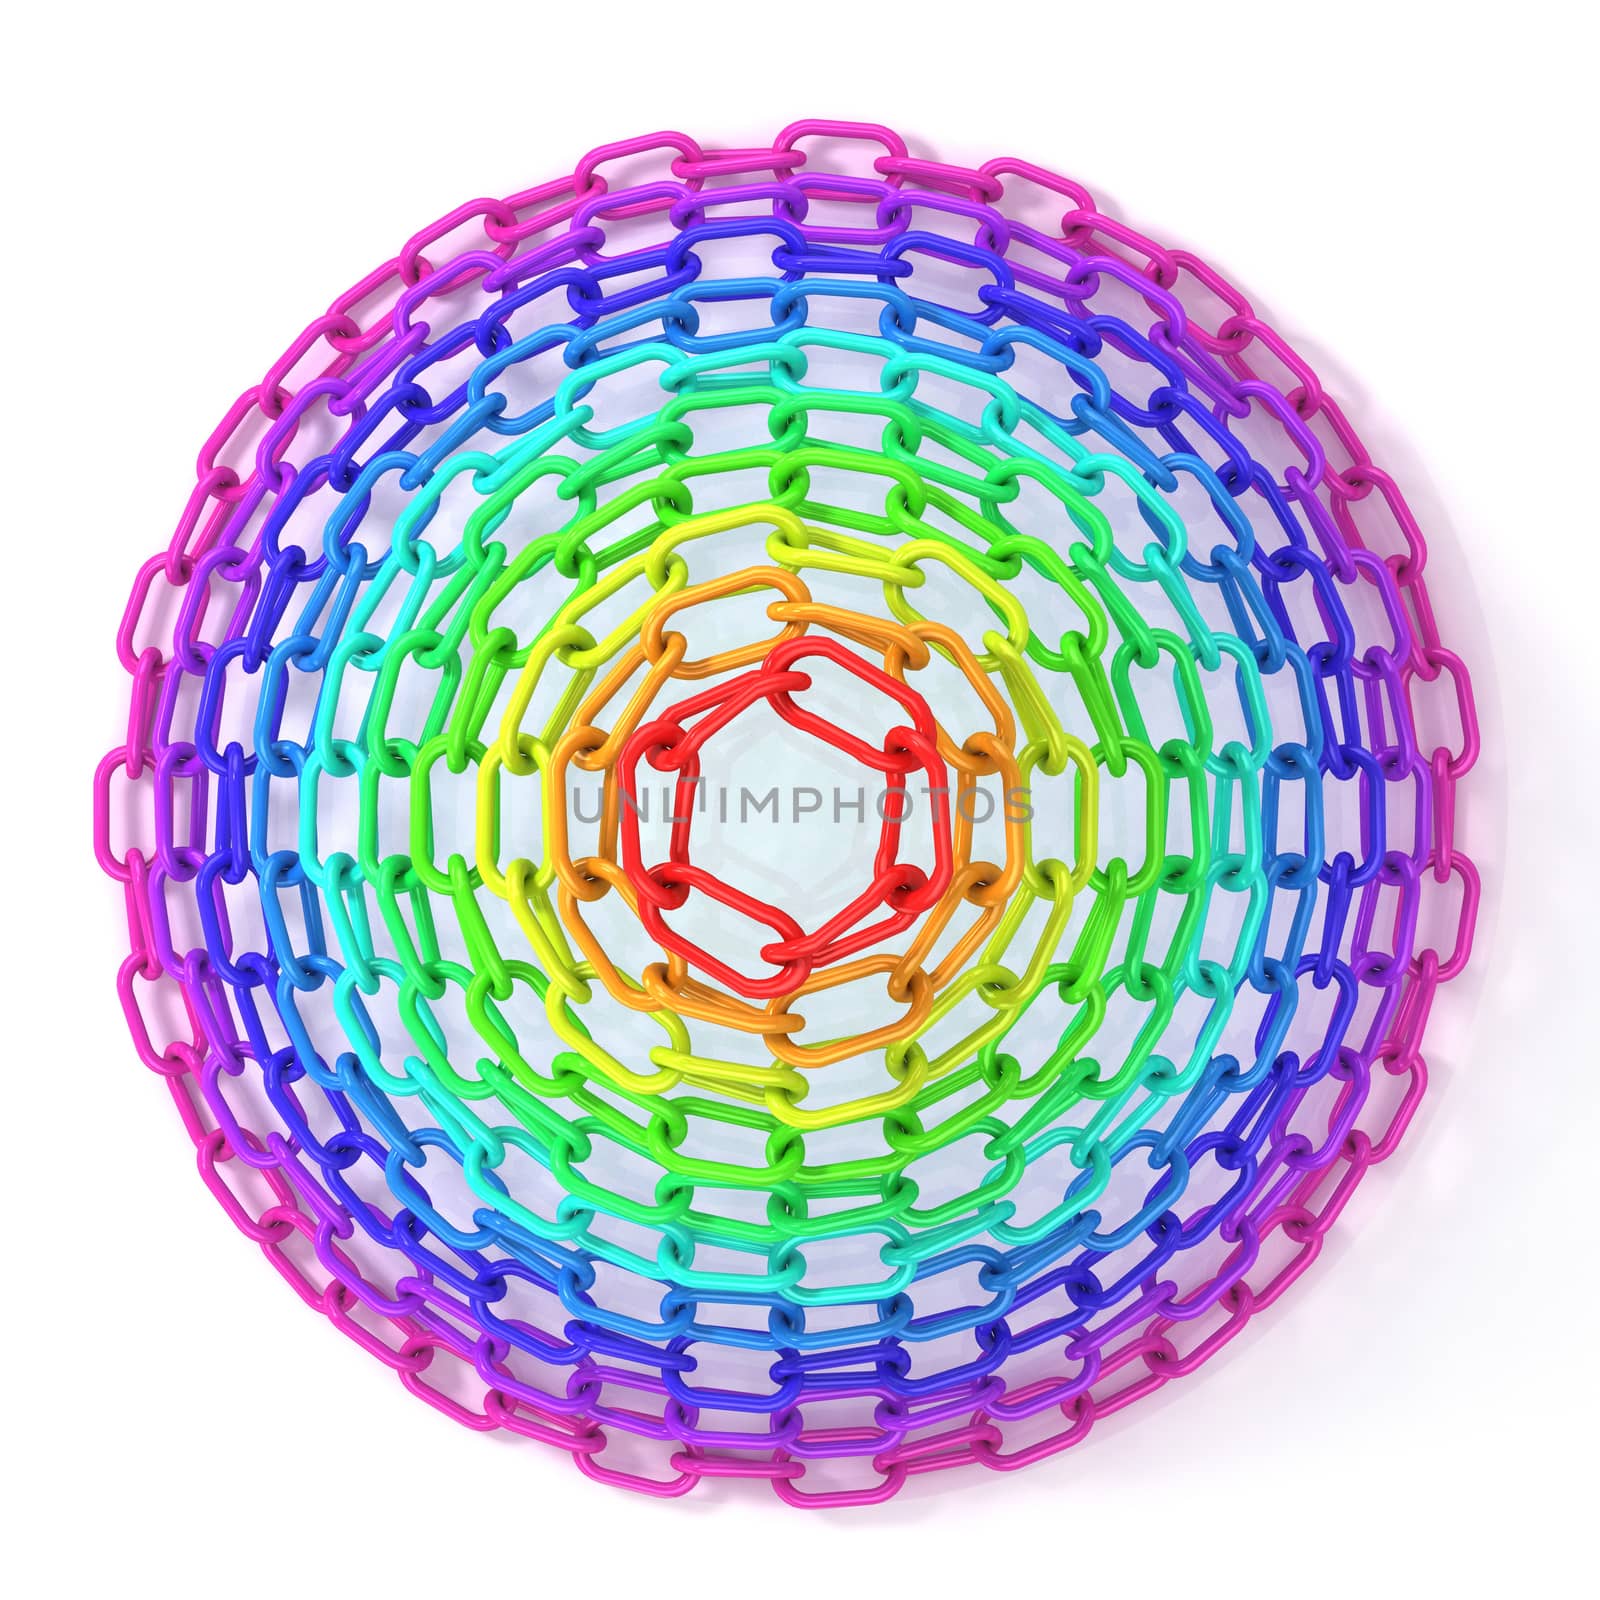 Colorful concentric circles made of chain by djmilic